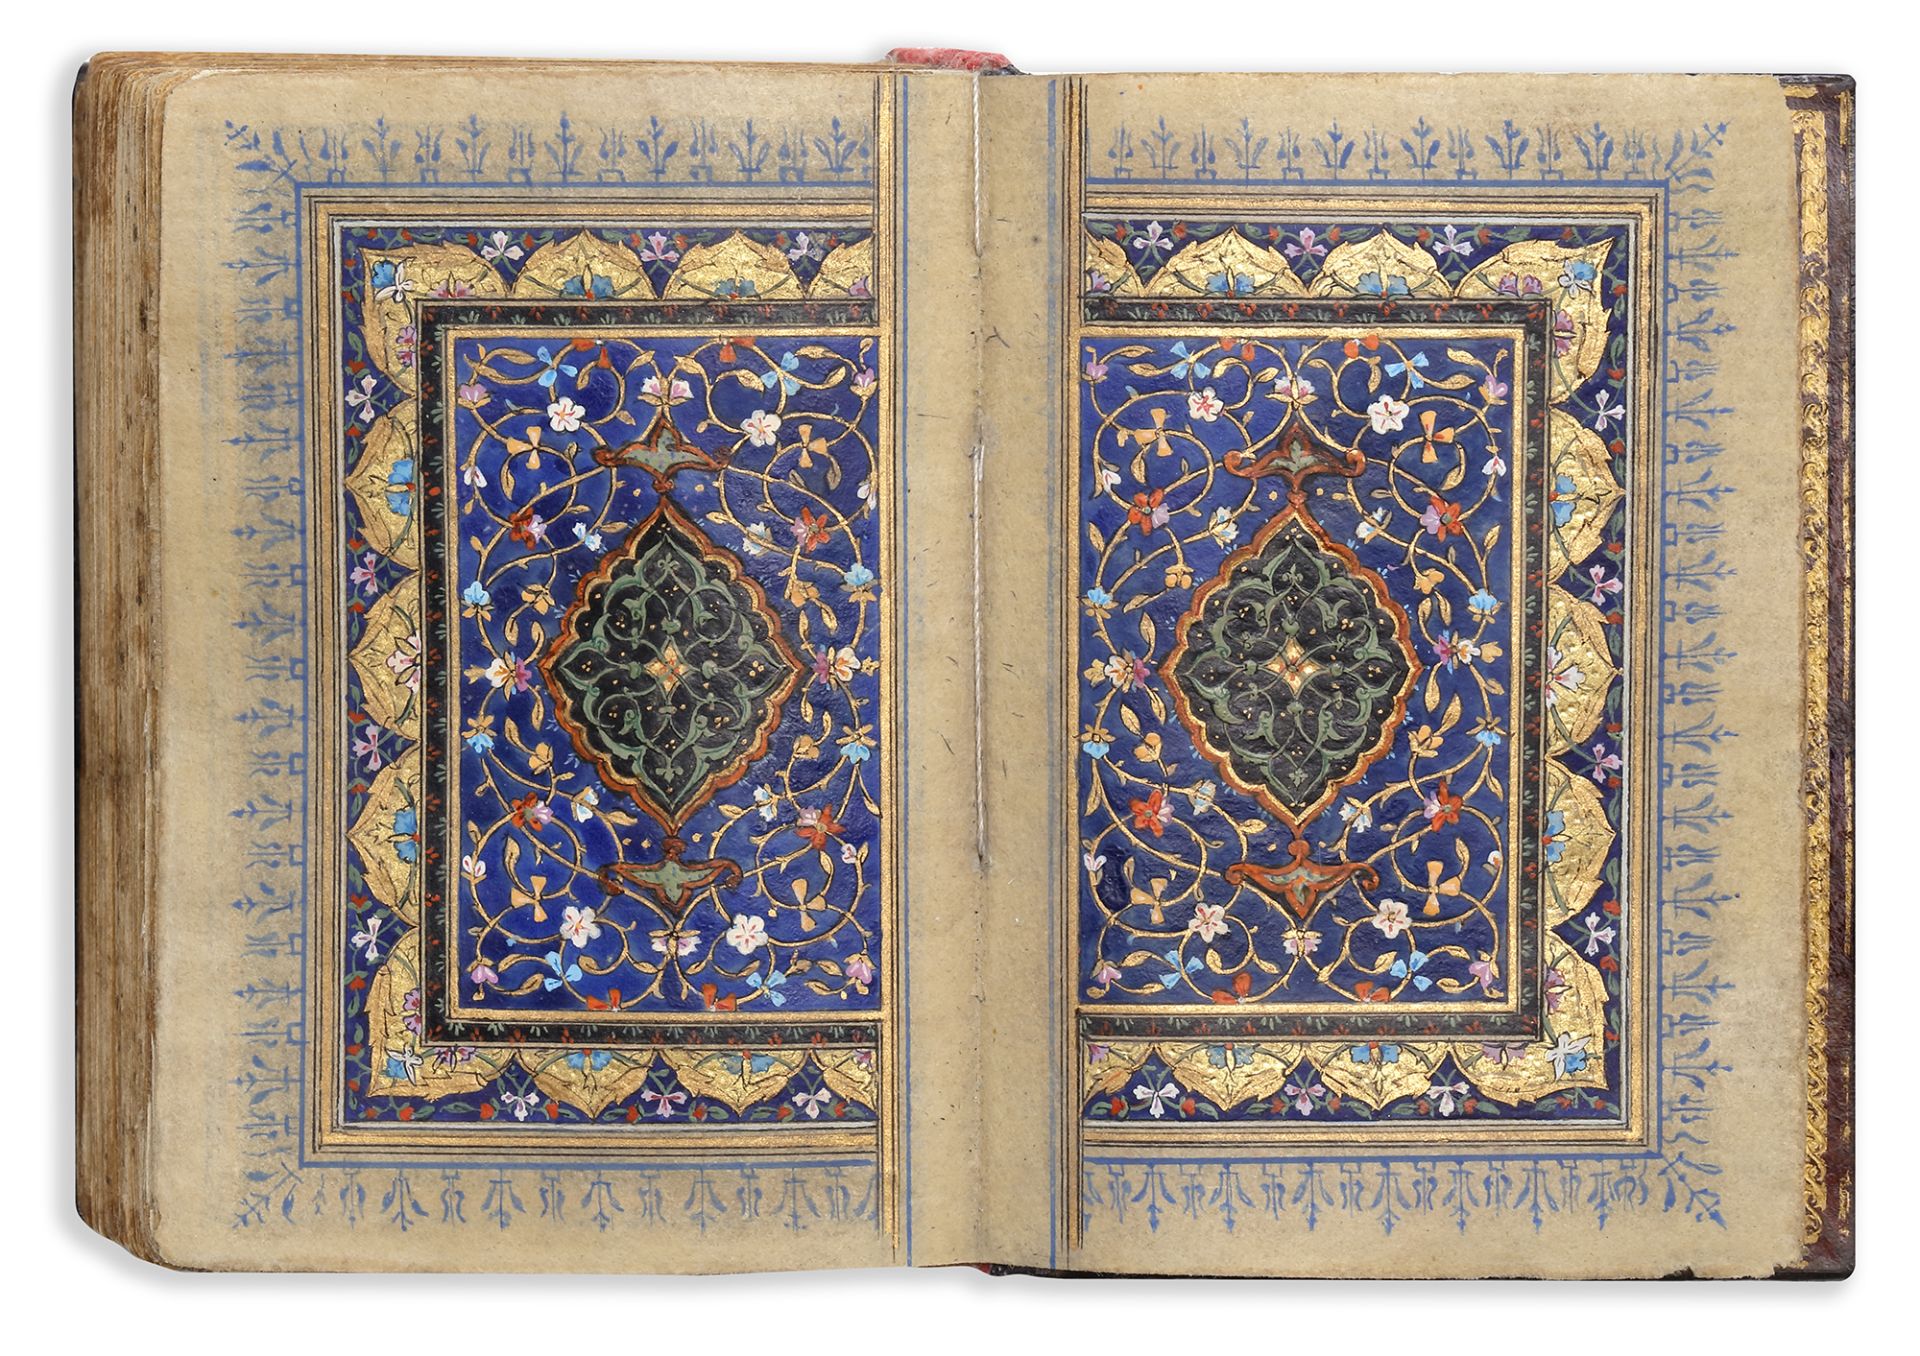 AN OTTOMAN MINIATURE QURAN DATED 945 AH/1538 AD - Image 2 of 7